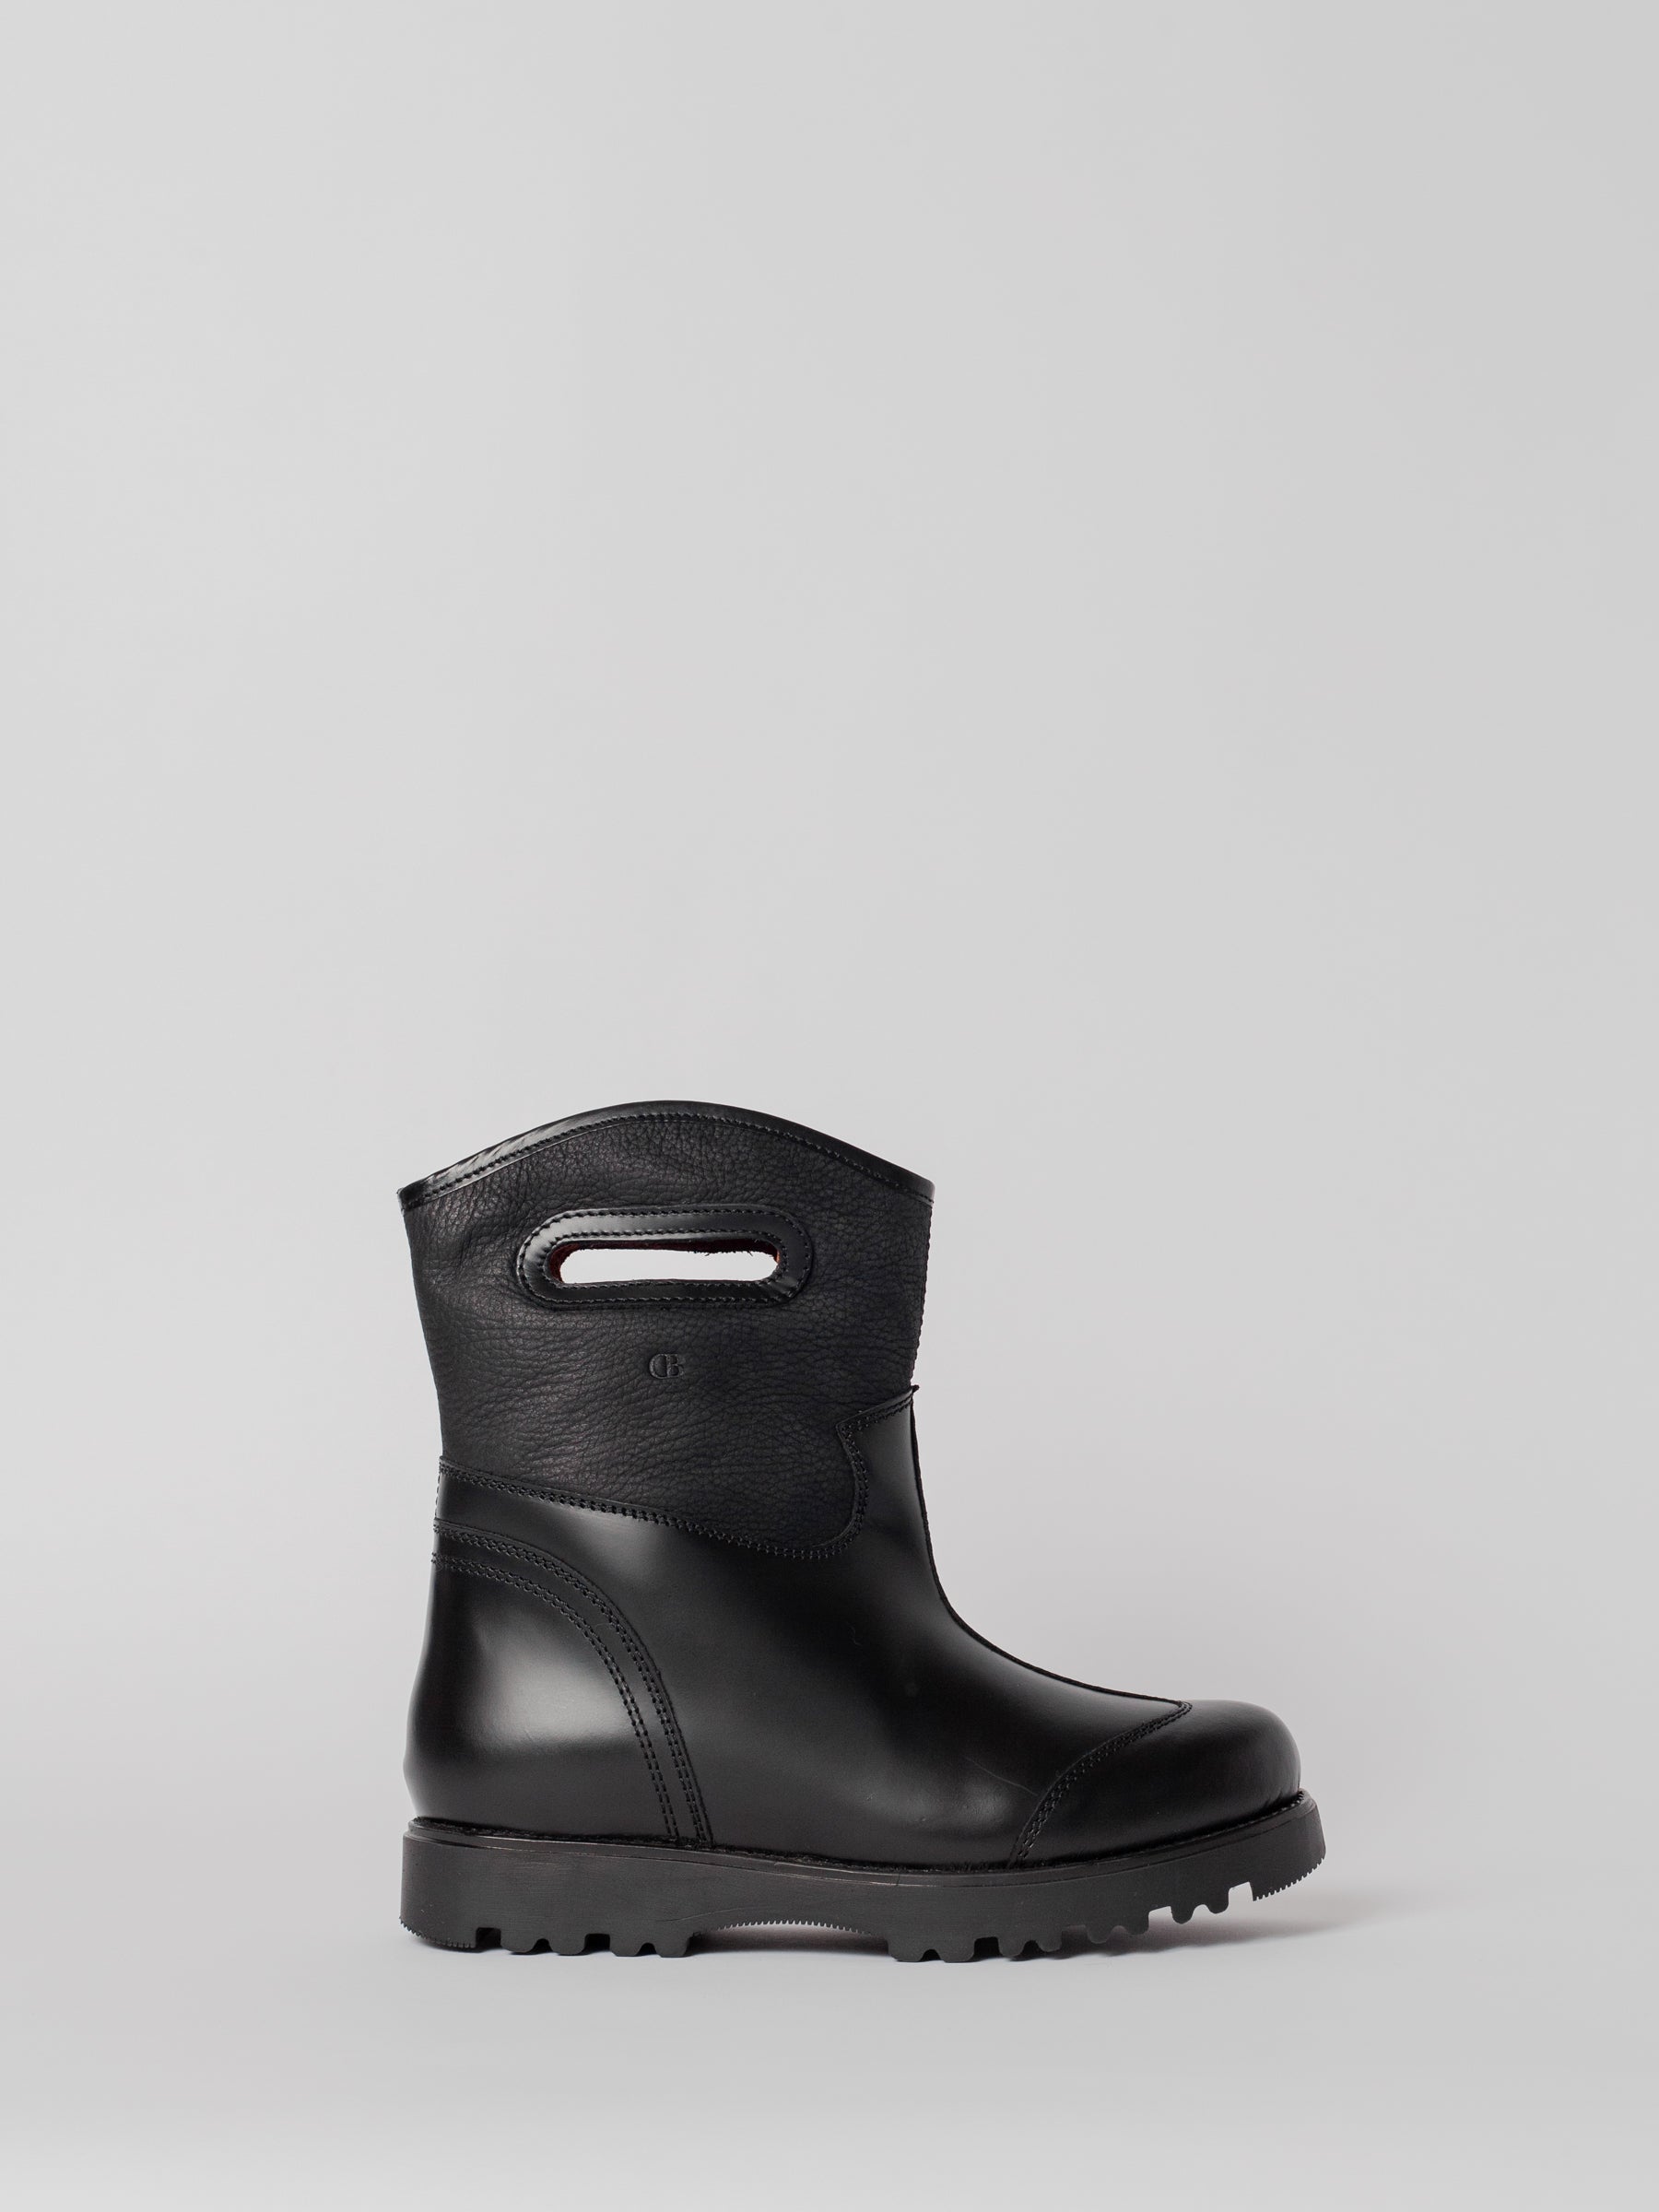 Blankens The Alexia Low Eco black low boot with handles. warm with fuzzy wool lining. water resistant